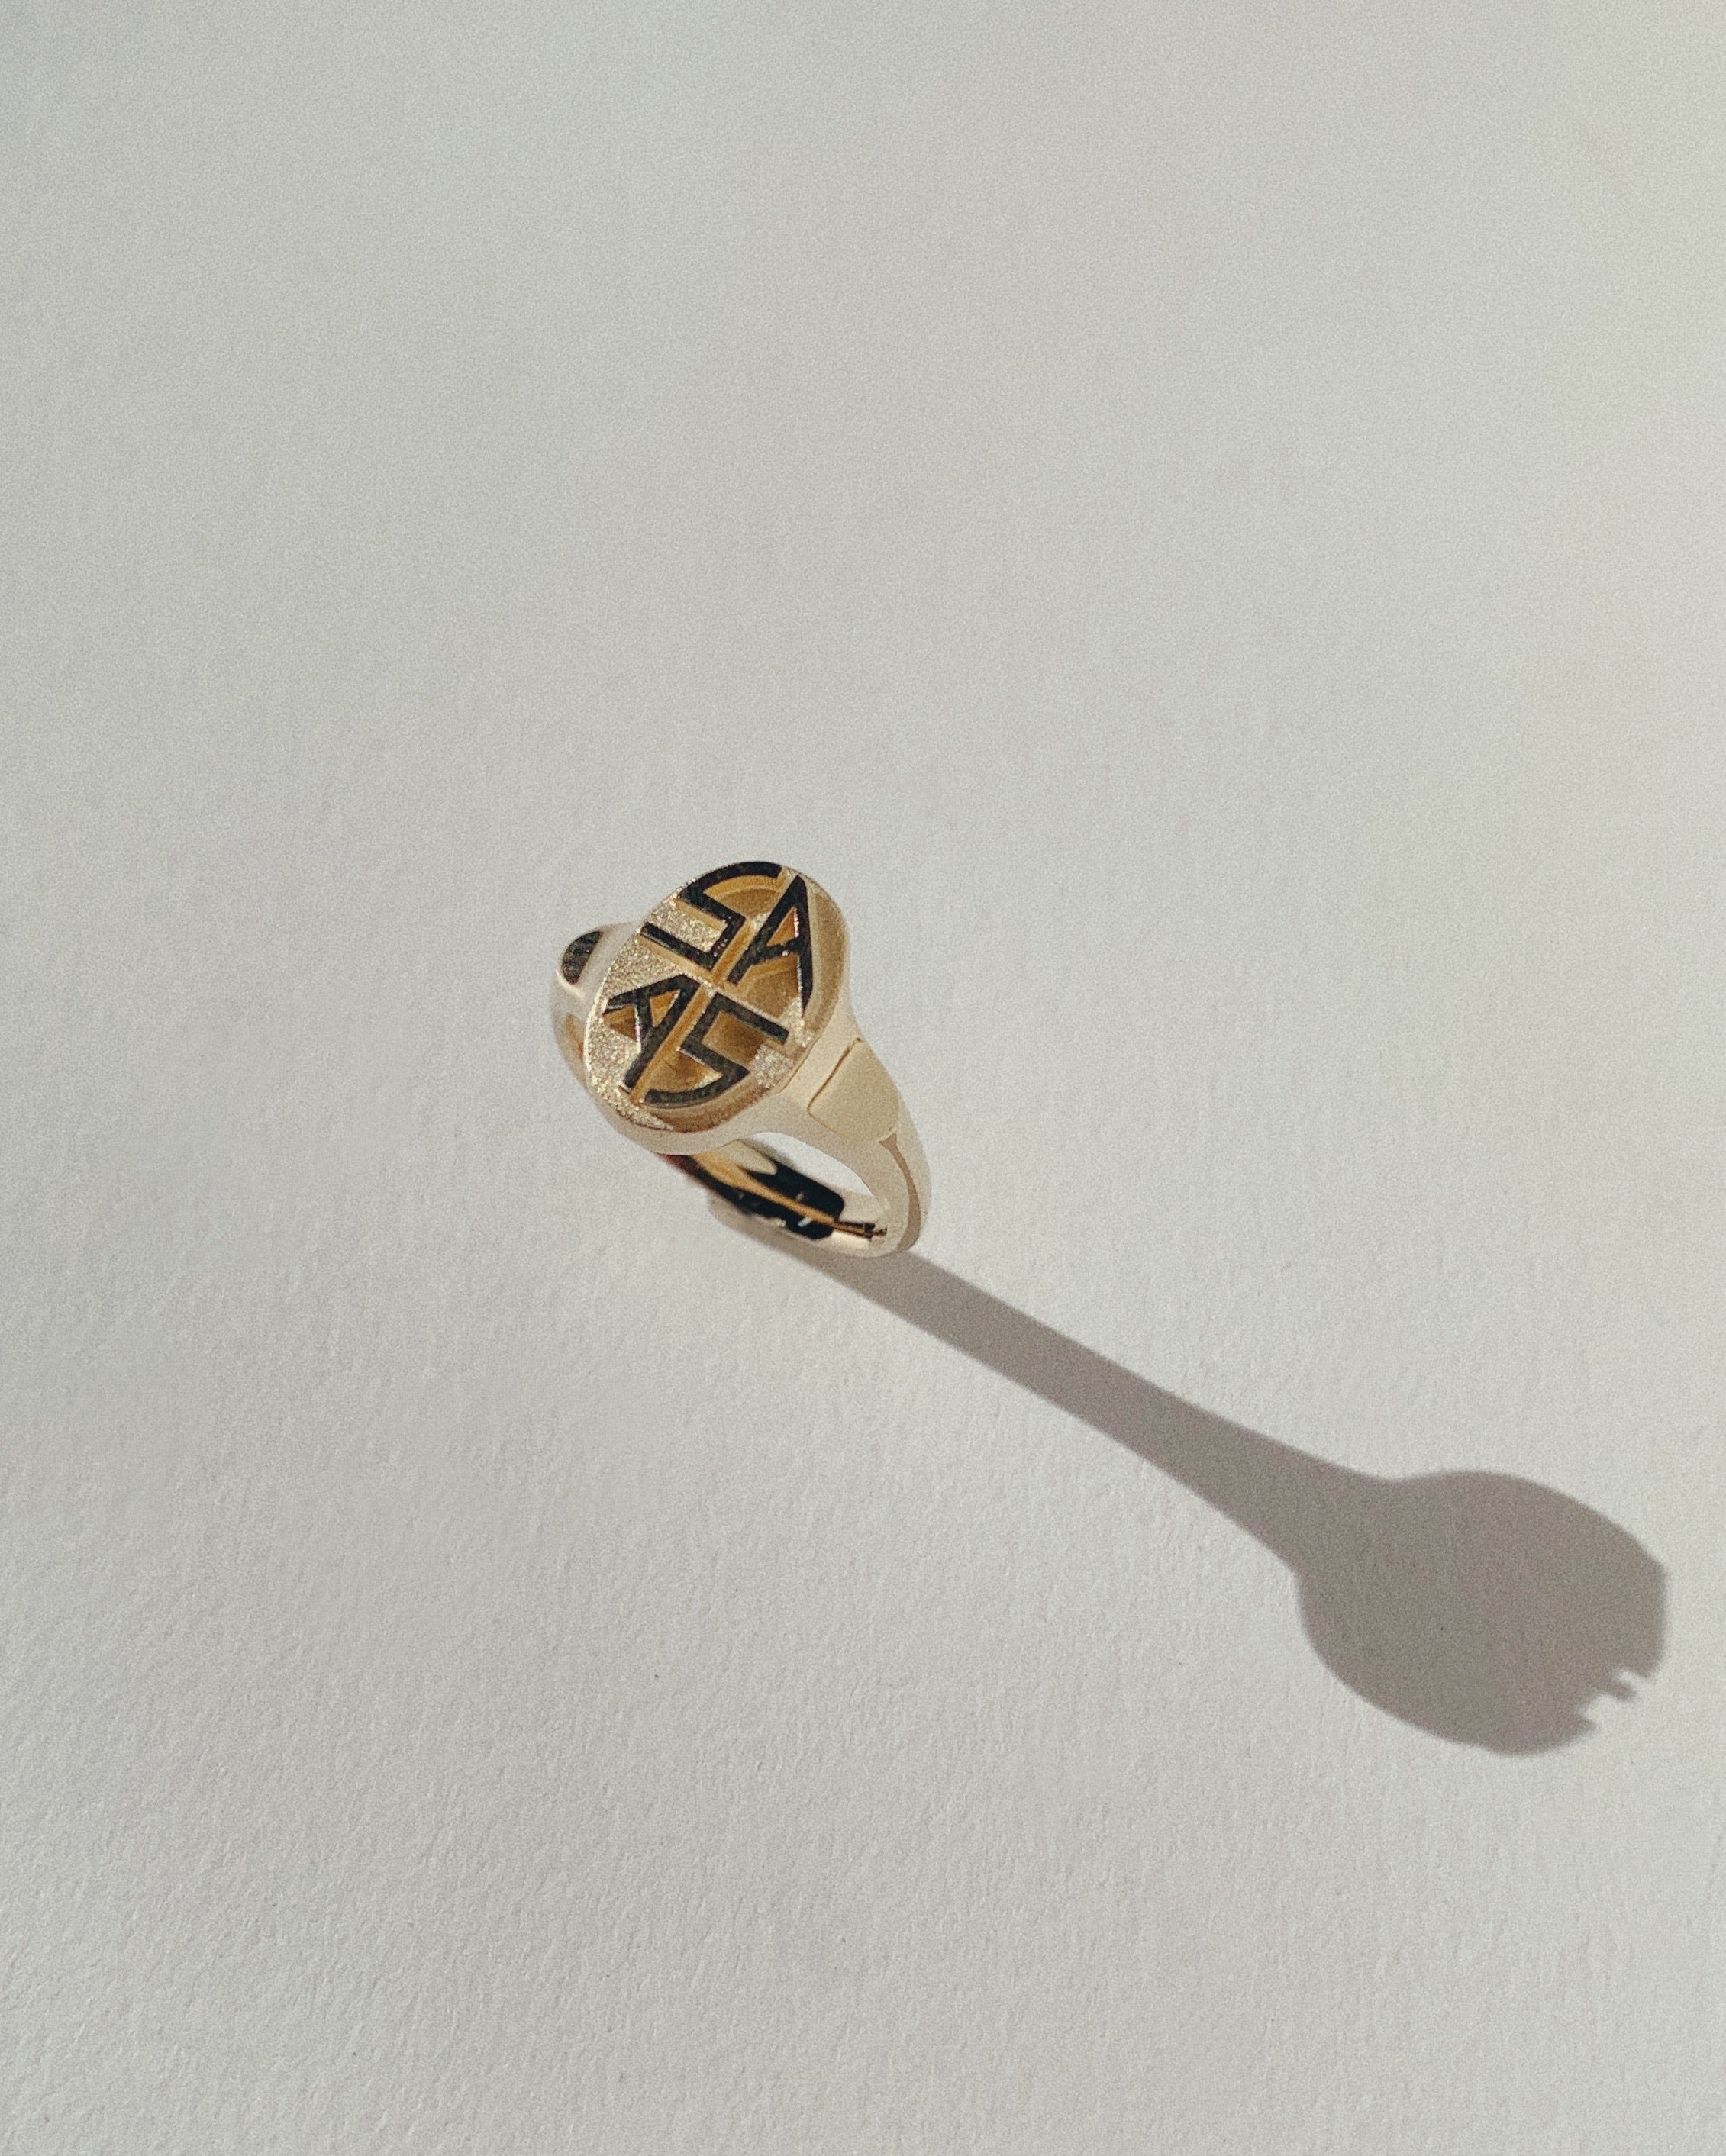 Not Your Grandfather's Signet Ring